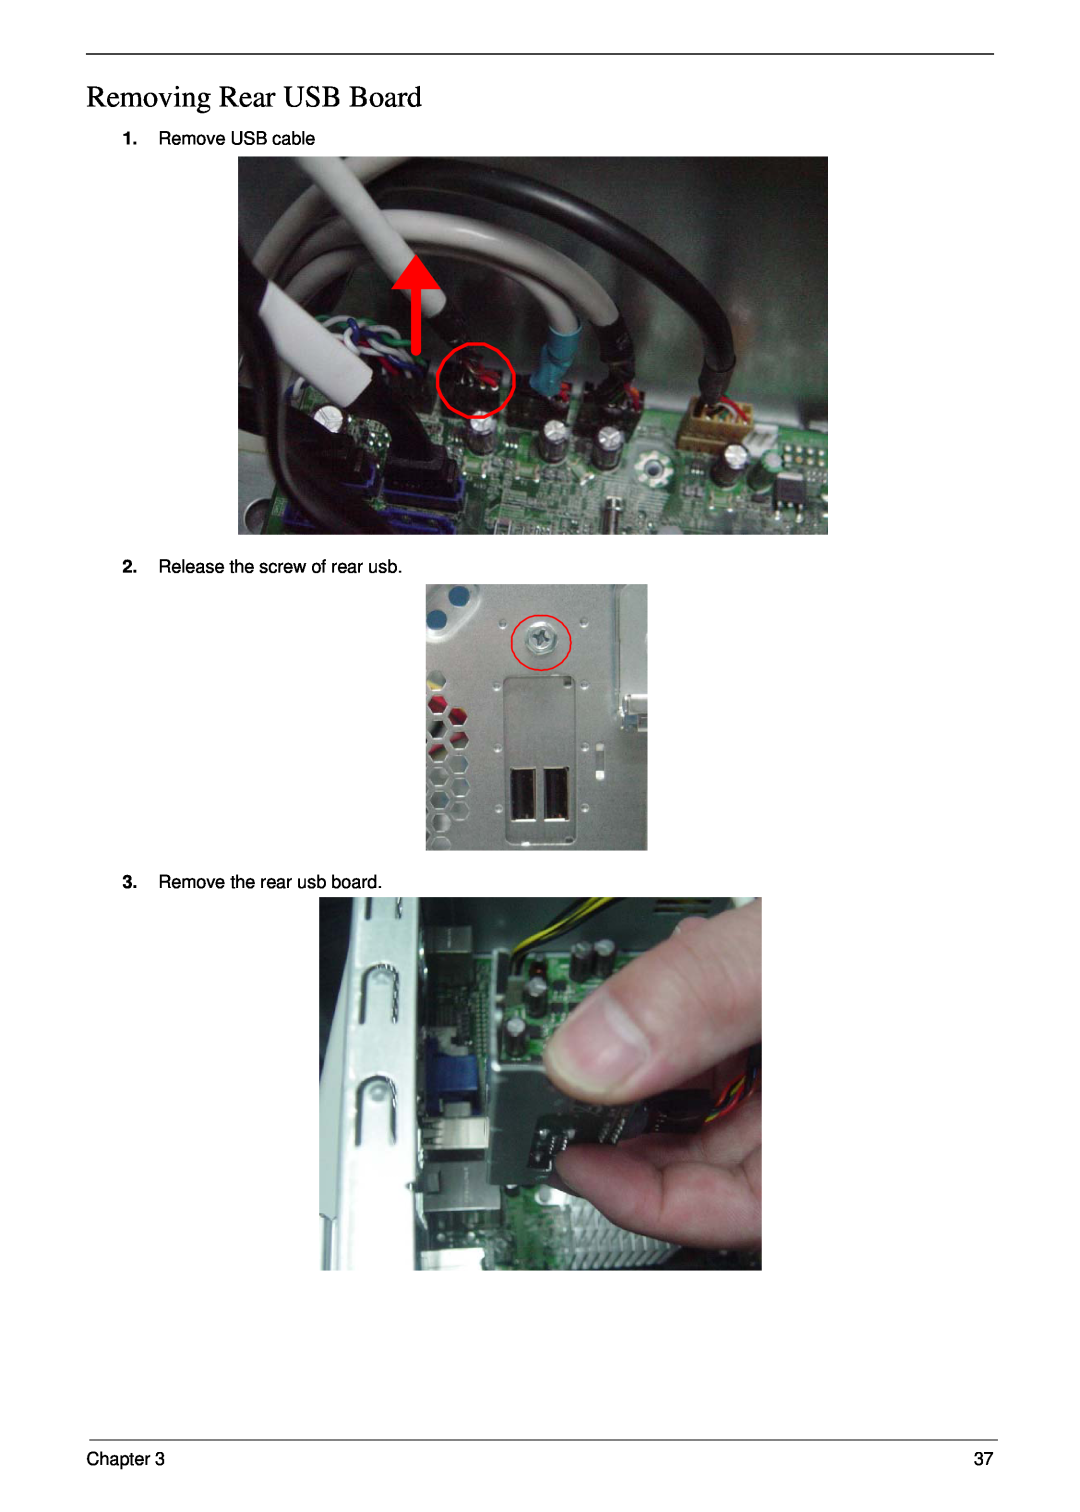 Acer m3400(g) manual Removing Rear USB Board, Remove USB cable 2. Release the screw of rear usb, Remove the rear usb board 